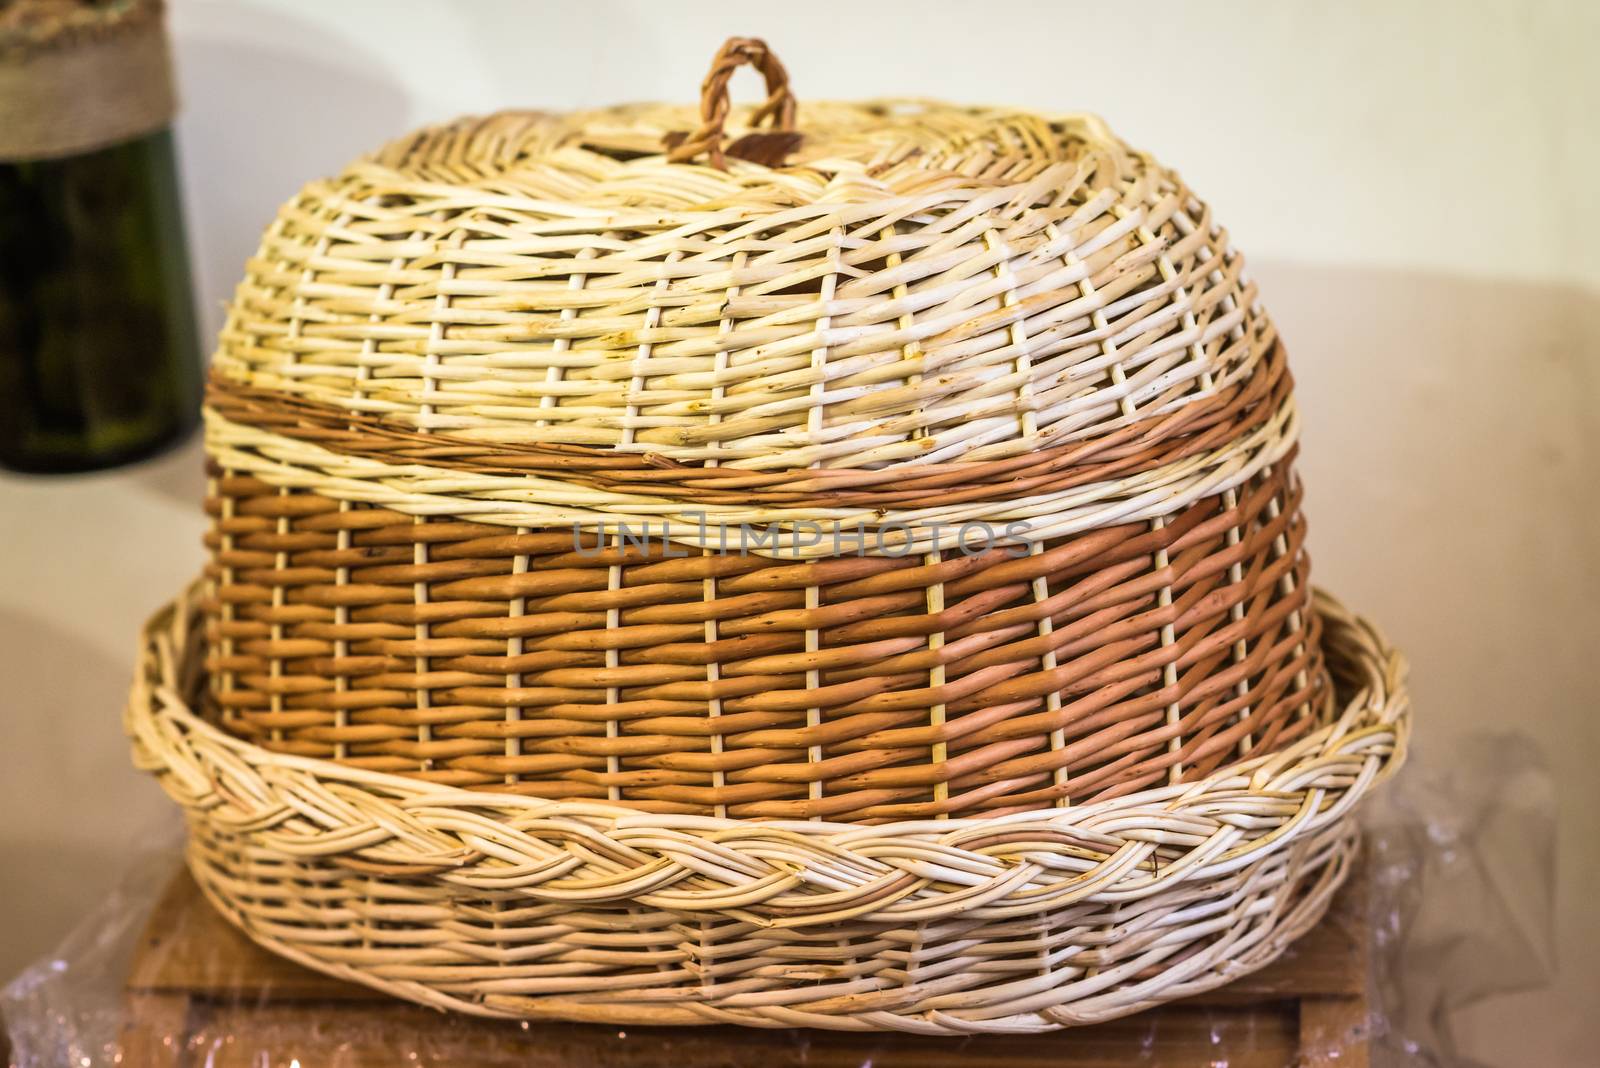 Wicker bread bin on the table at the exhibition